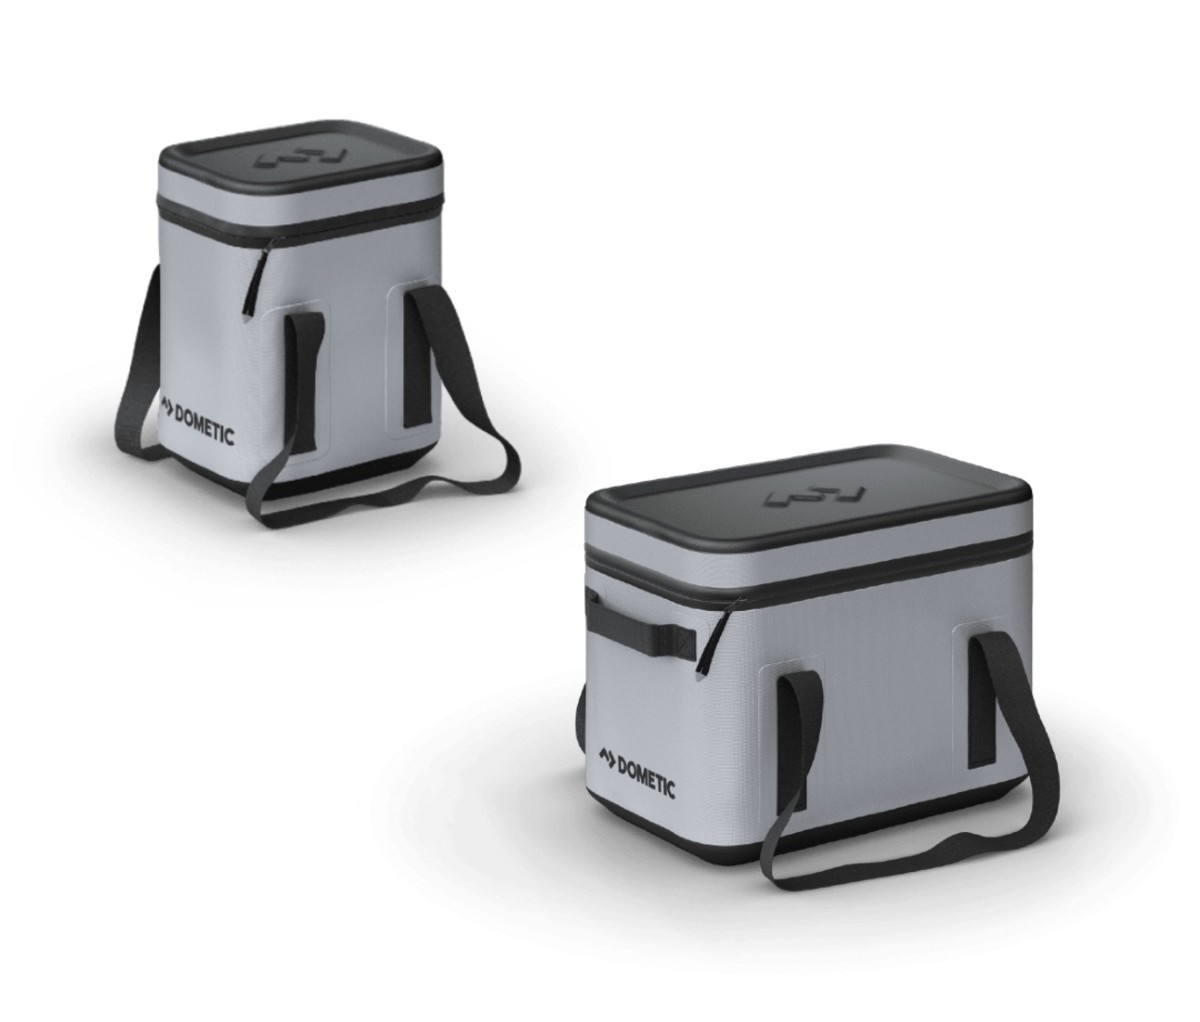 Choose Dometic's new line of soft storage from their GO collection for car camping.